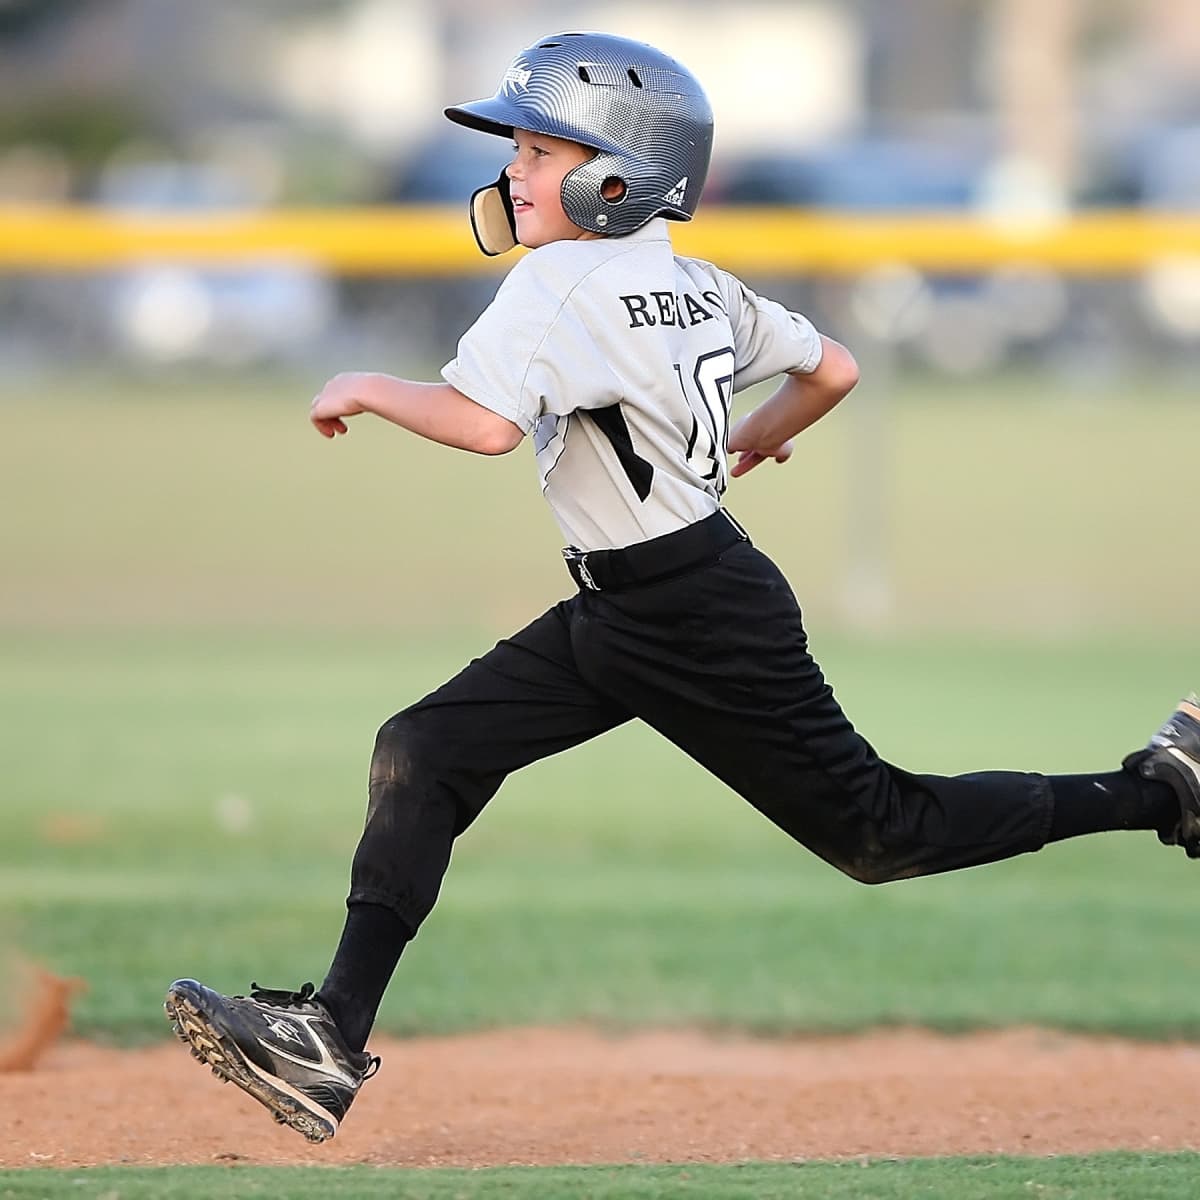 What to Wear for Playing Baseball - HowTheyPlay